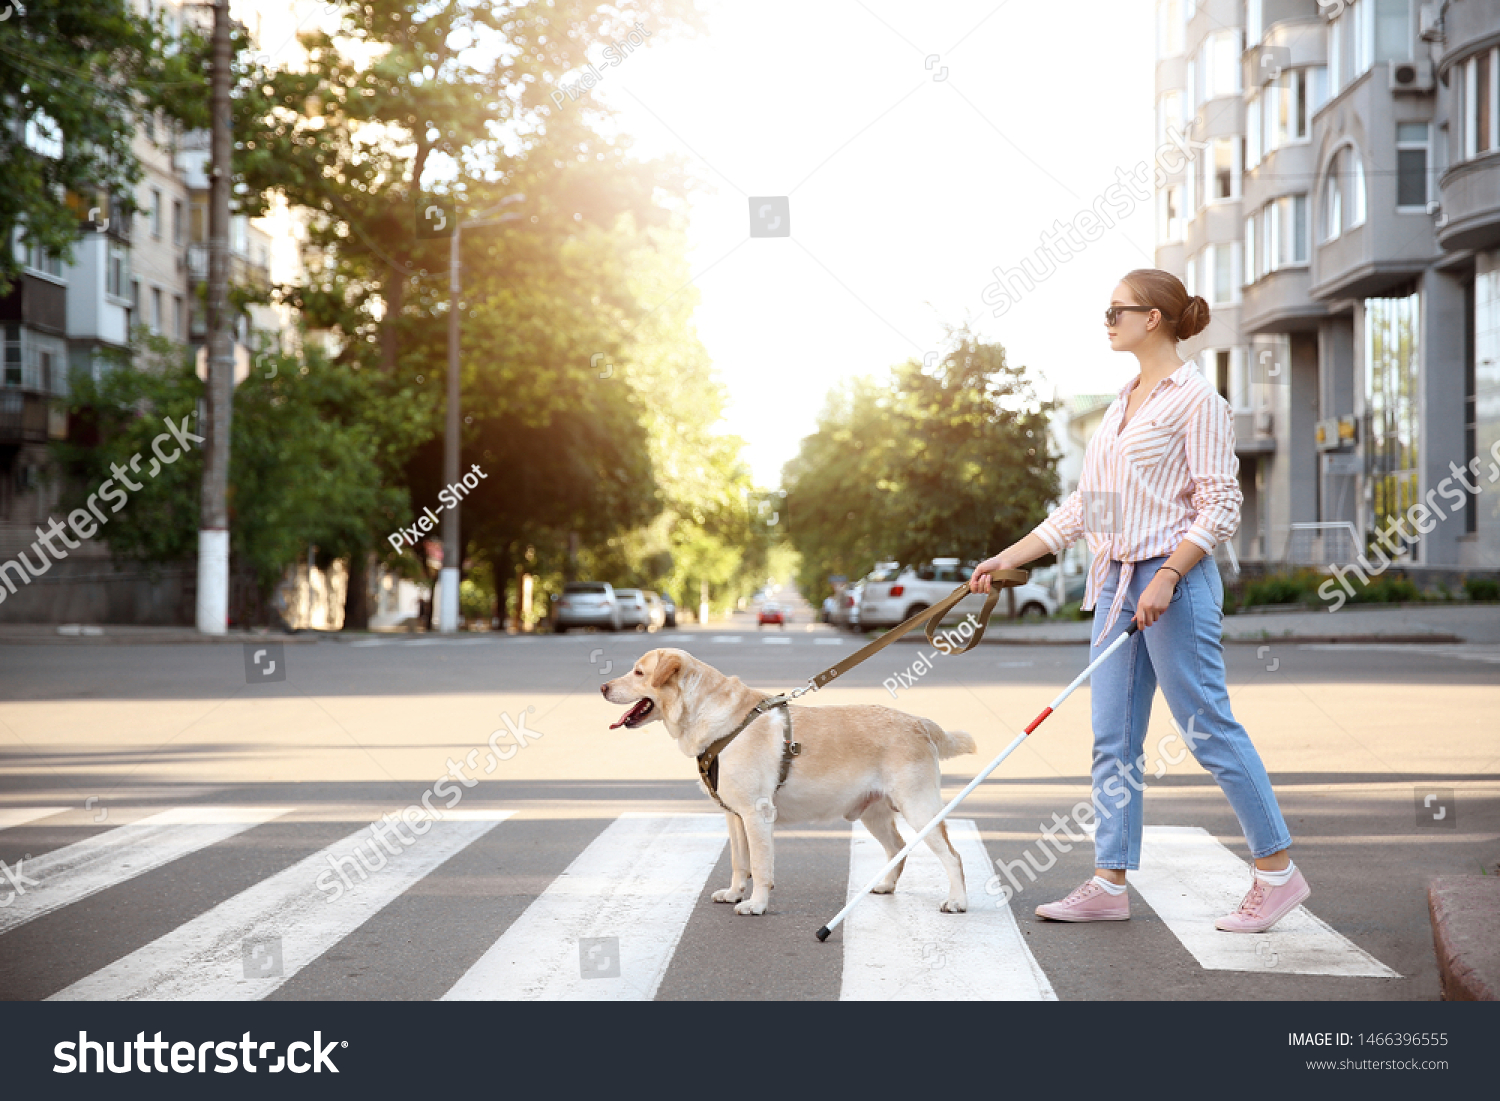 Young blind woman with guide dog crossing road #1466396555